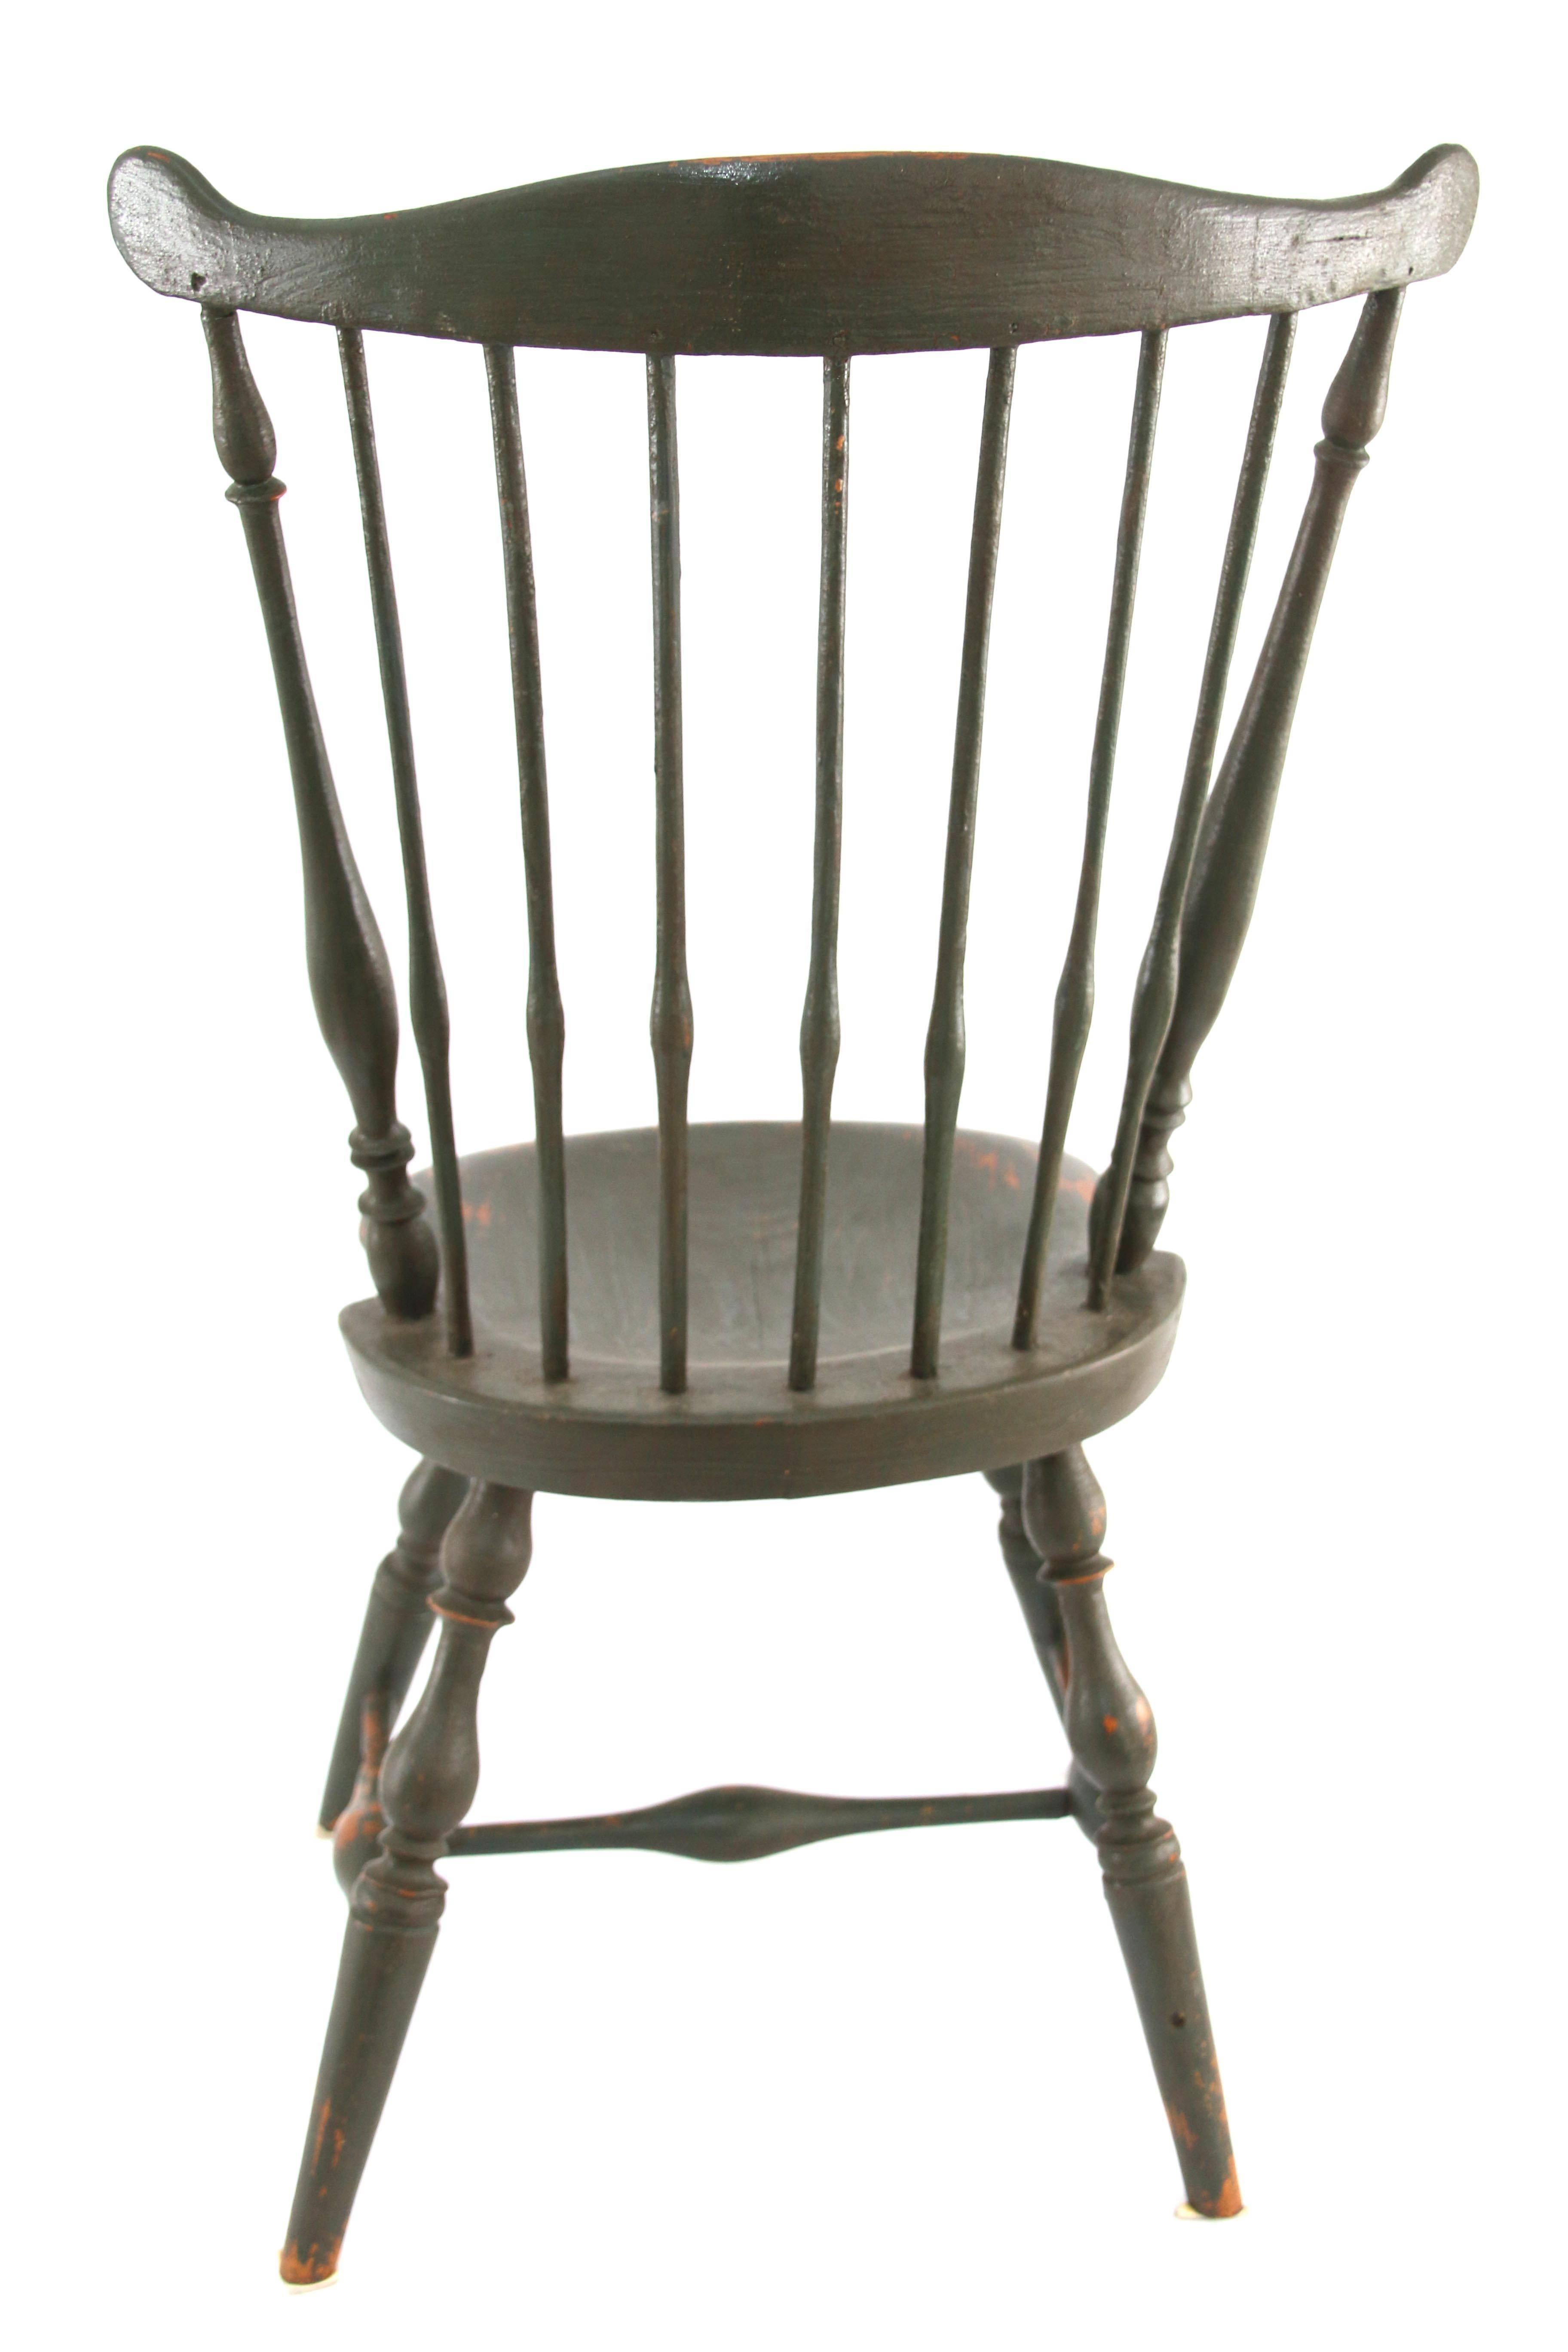 Early 19th Century Connecticut Windsor Side Chair Signed I. Clark, circa 1800 For Sale